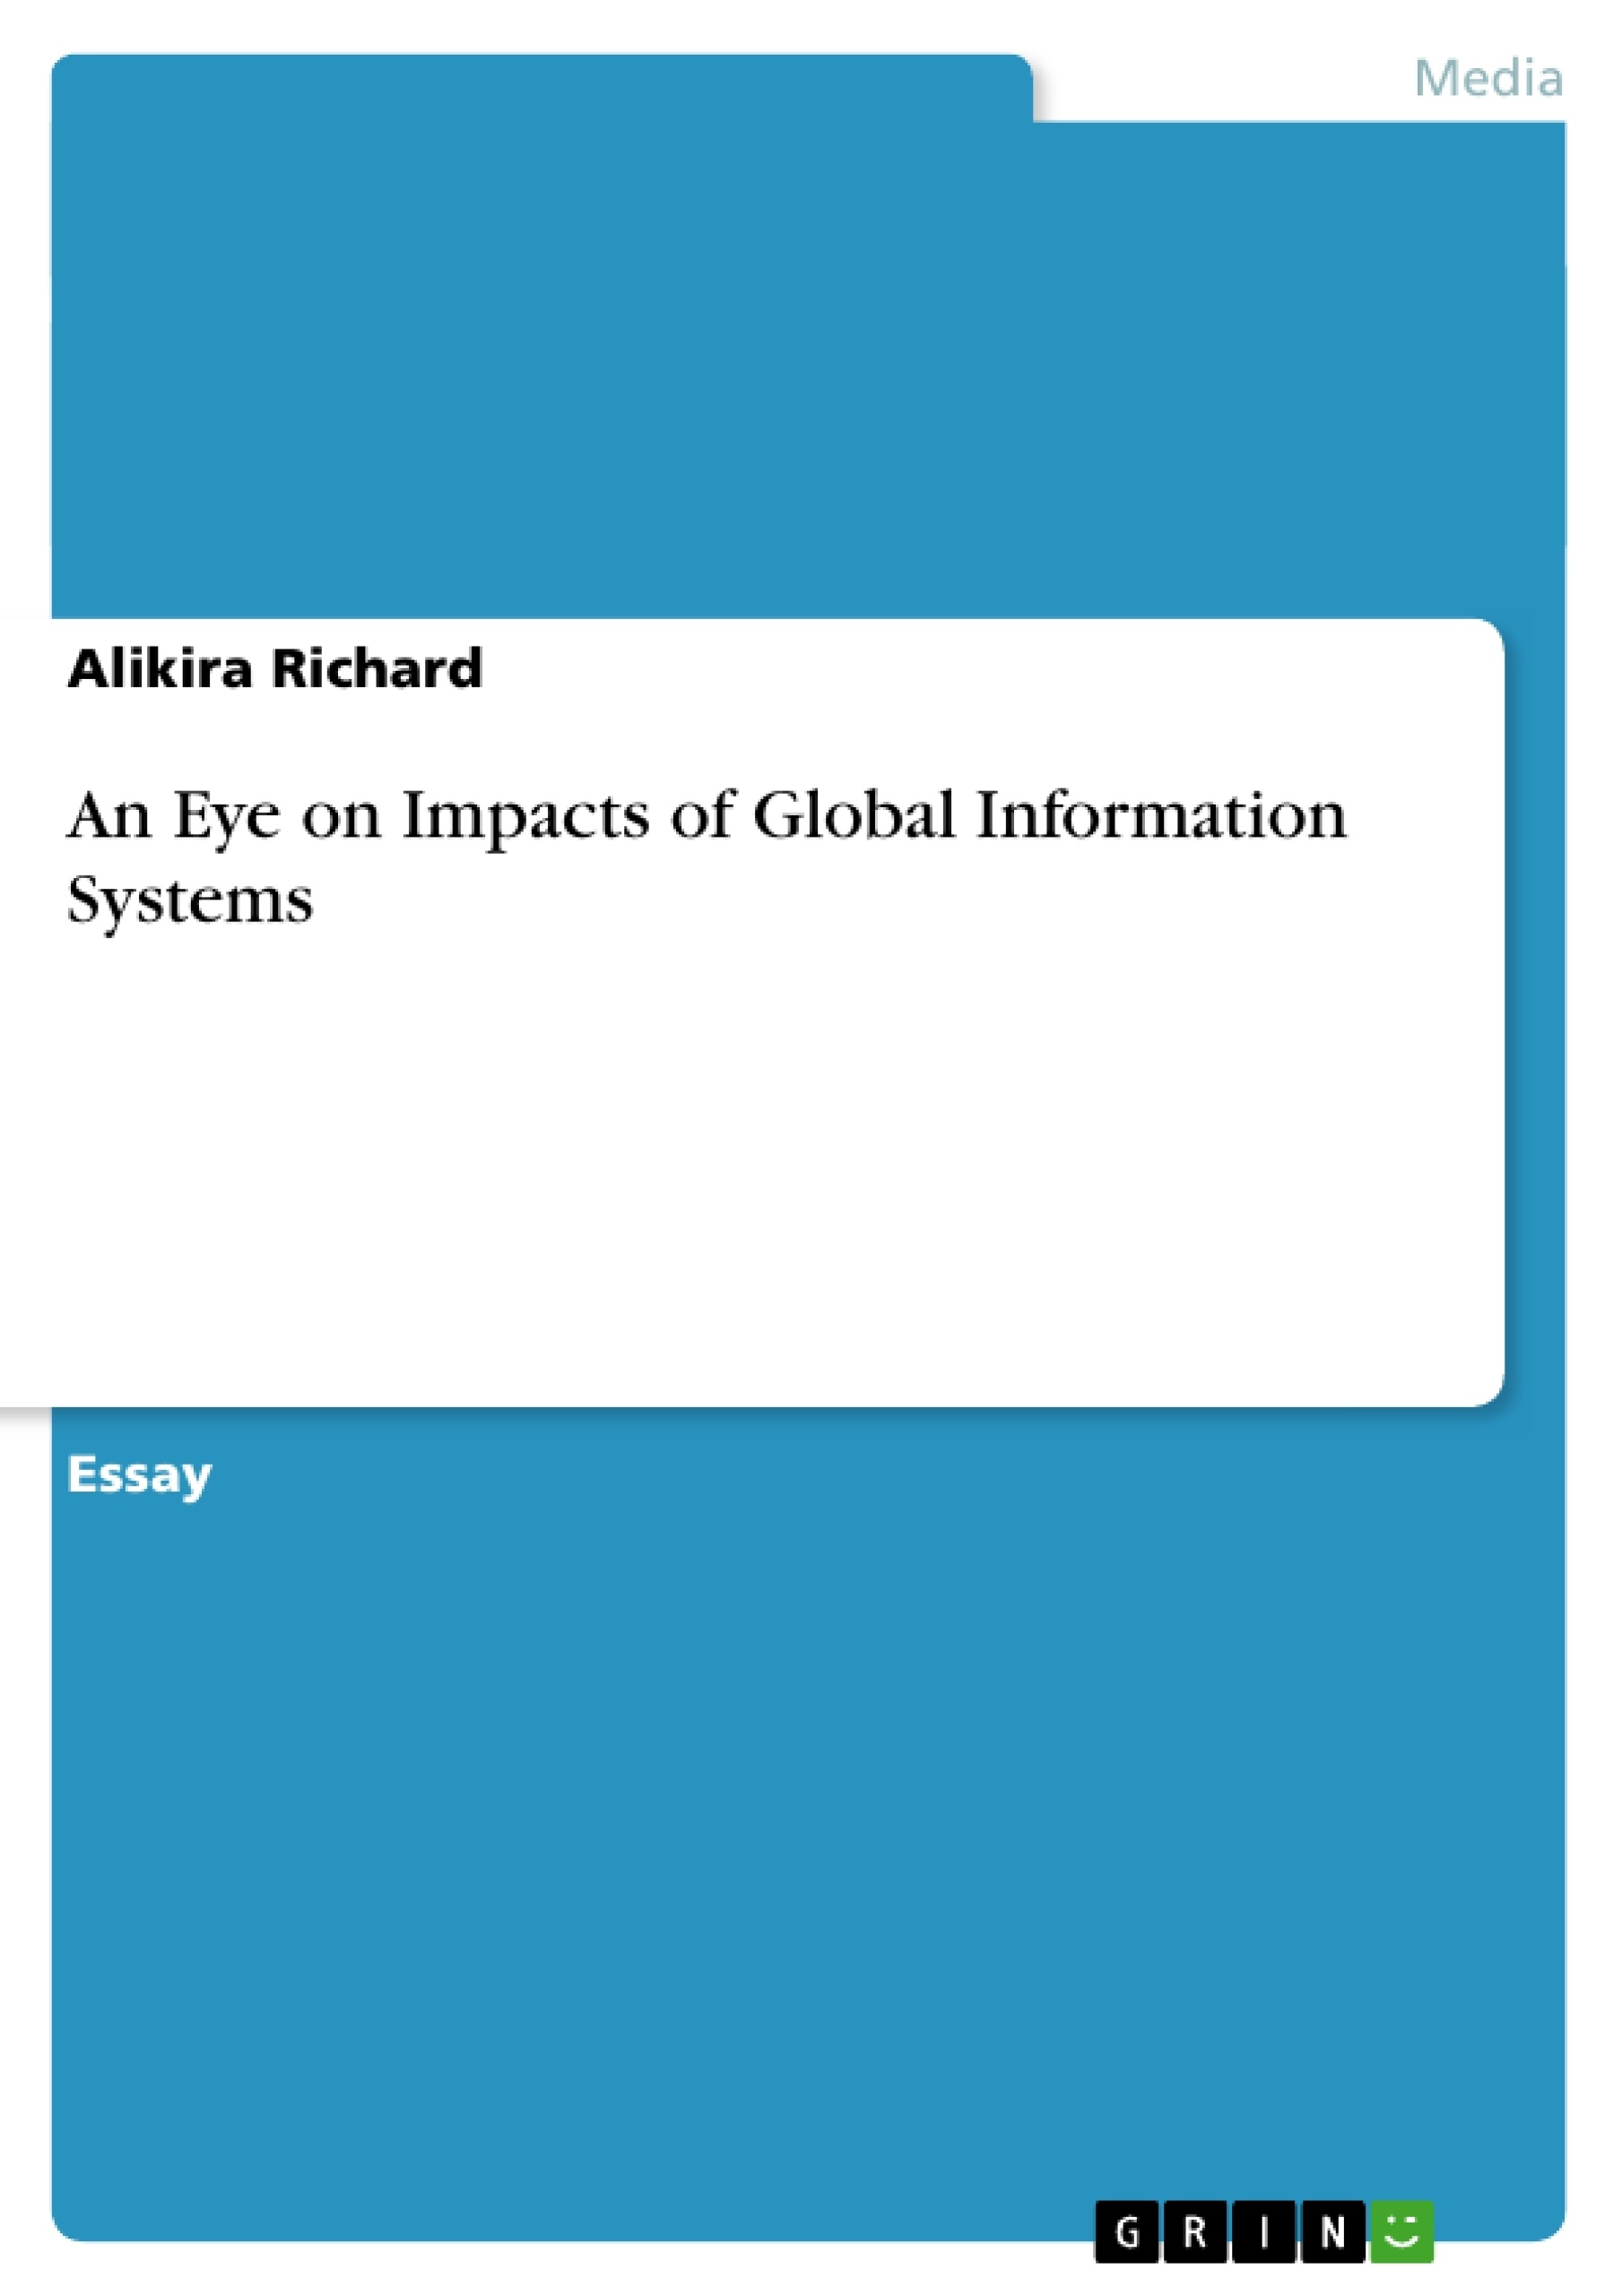 Title: An Eye on Impacts of Global Information Systems